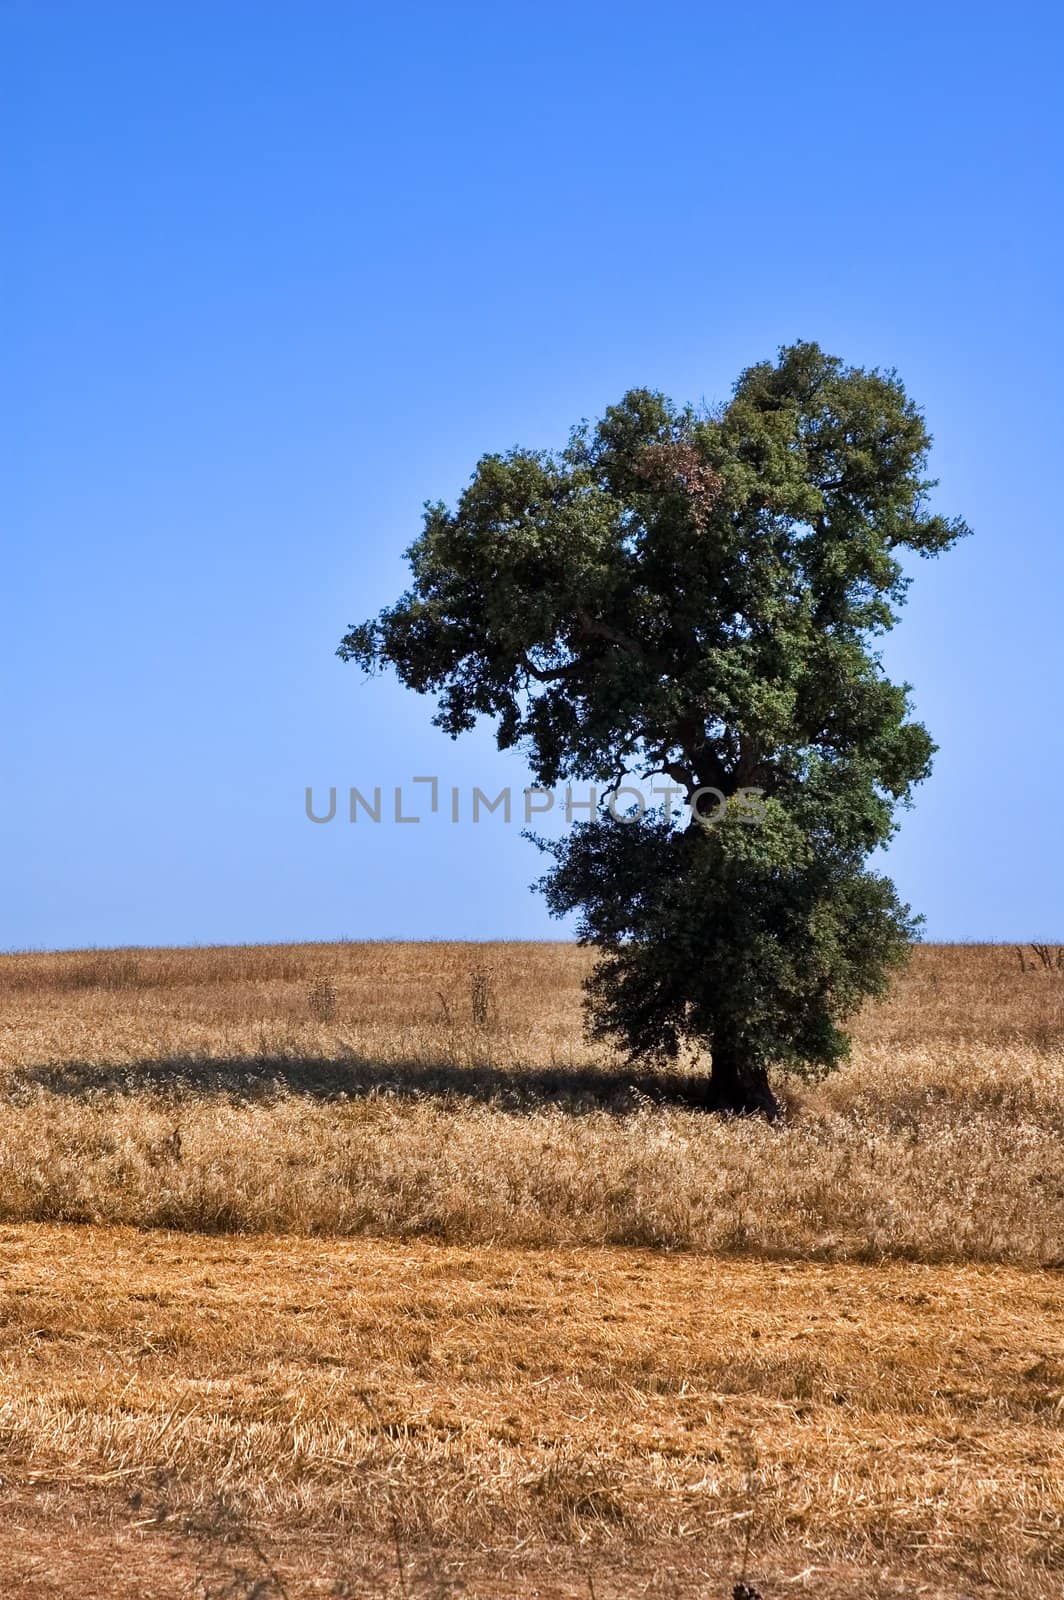 Lonely tree in dry  field